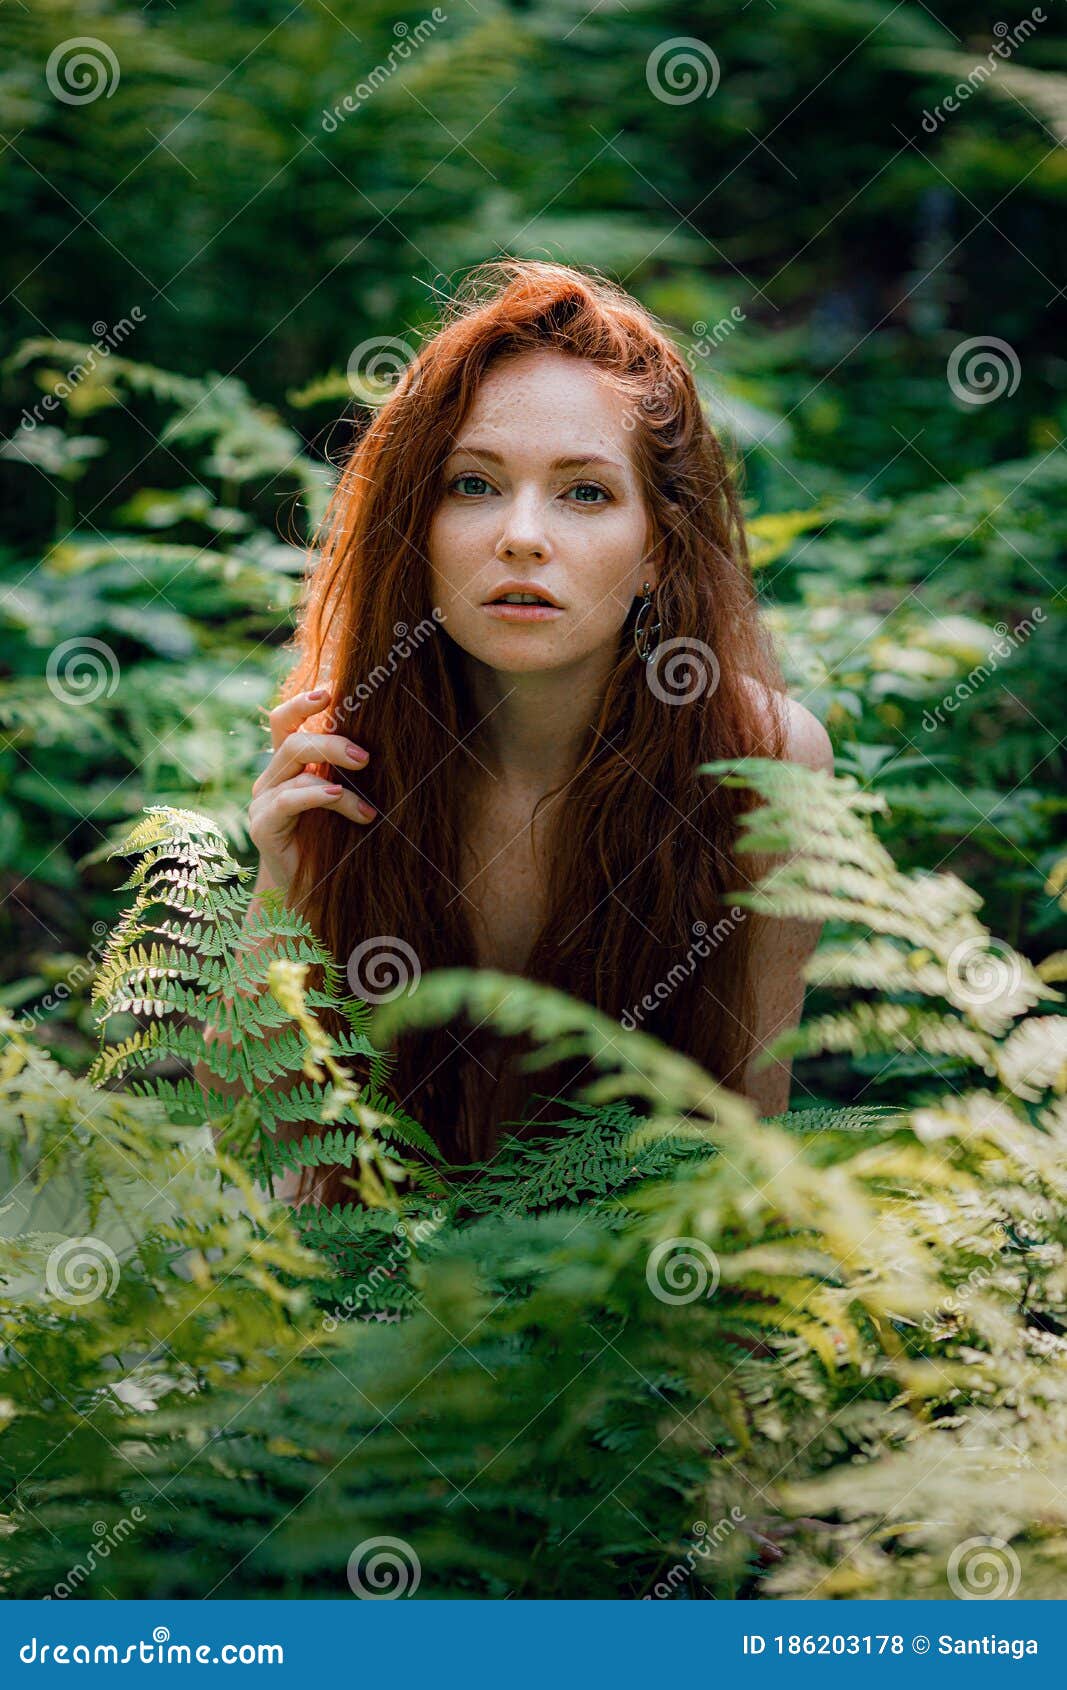 Fantasy Fairy Tale Forest, Fairytale Nature Goddess Stock Photo Image of attractive, 186203178